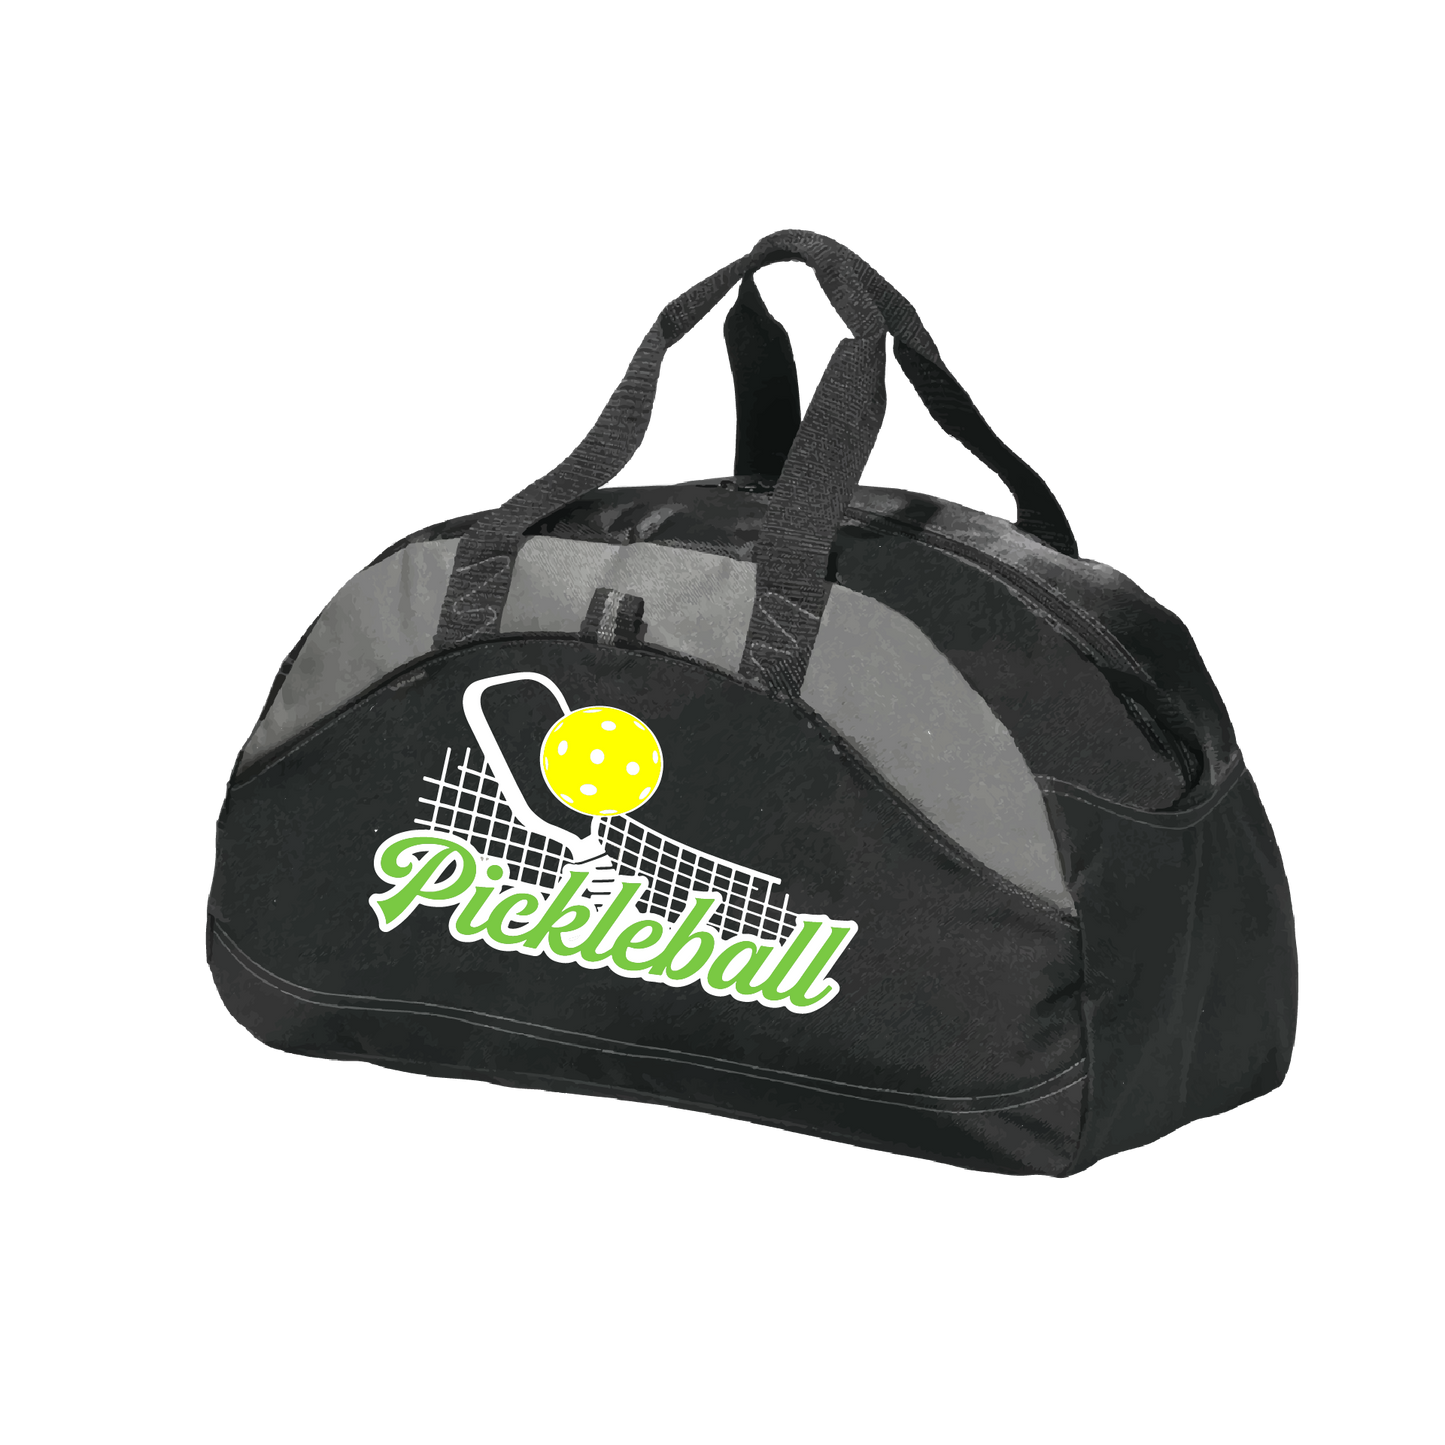 Picklebal Duffel Bag Design: Pickleball Net & Paddle  Carry your gear in comfort and style. This fun pickleball duffel bag is the perfect accessory for all pickleball players needing to keep their gear in one place. This medium sized duffel tote is ideal for all your pickleball activities. The large center compartment allows for plenty of space and the mesh end pocket is perfect for holding a water bottle.